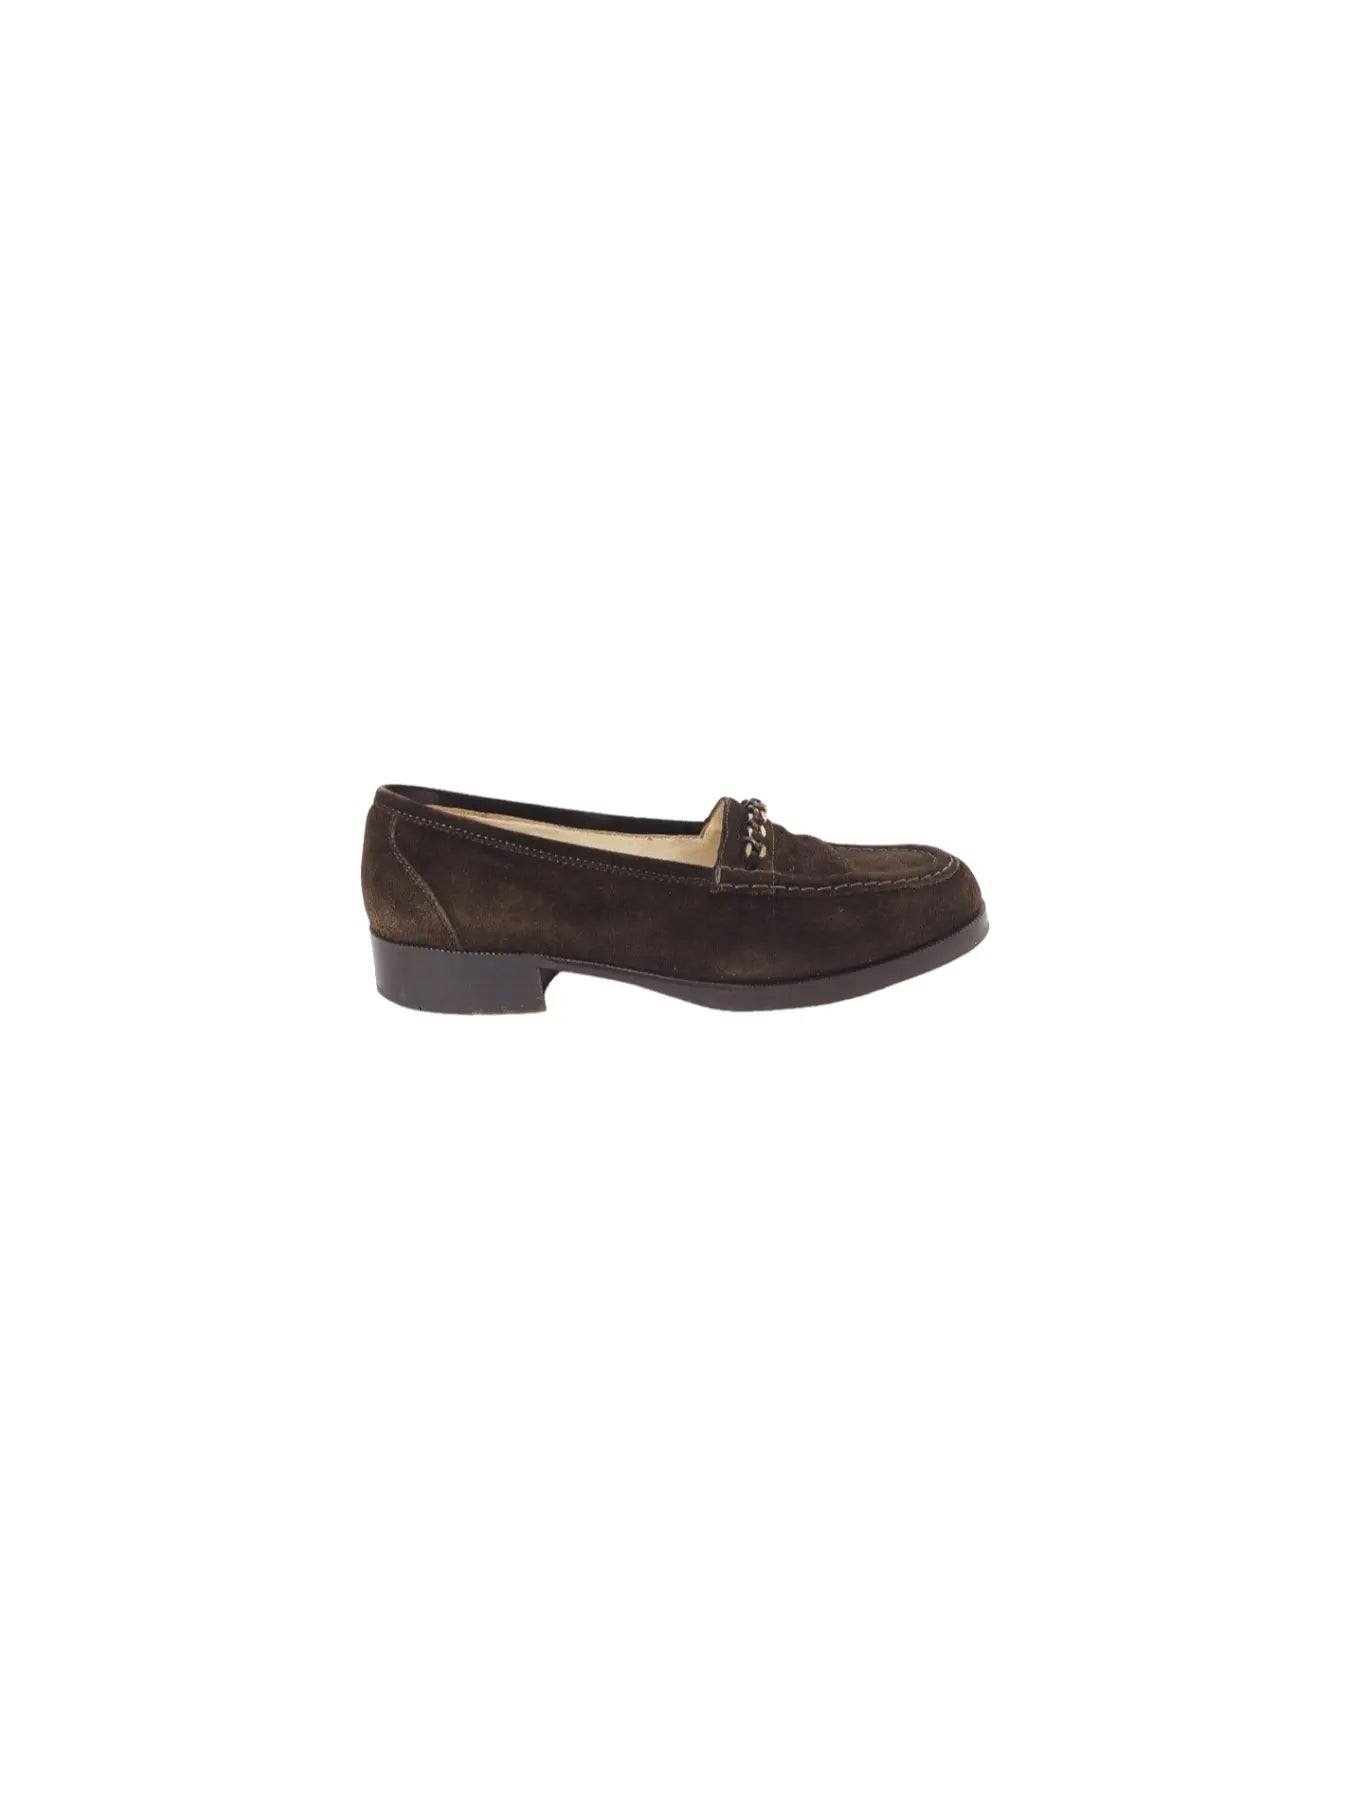 CHANEL Chain Suede Brown Leather Loafers, 36.5